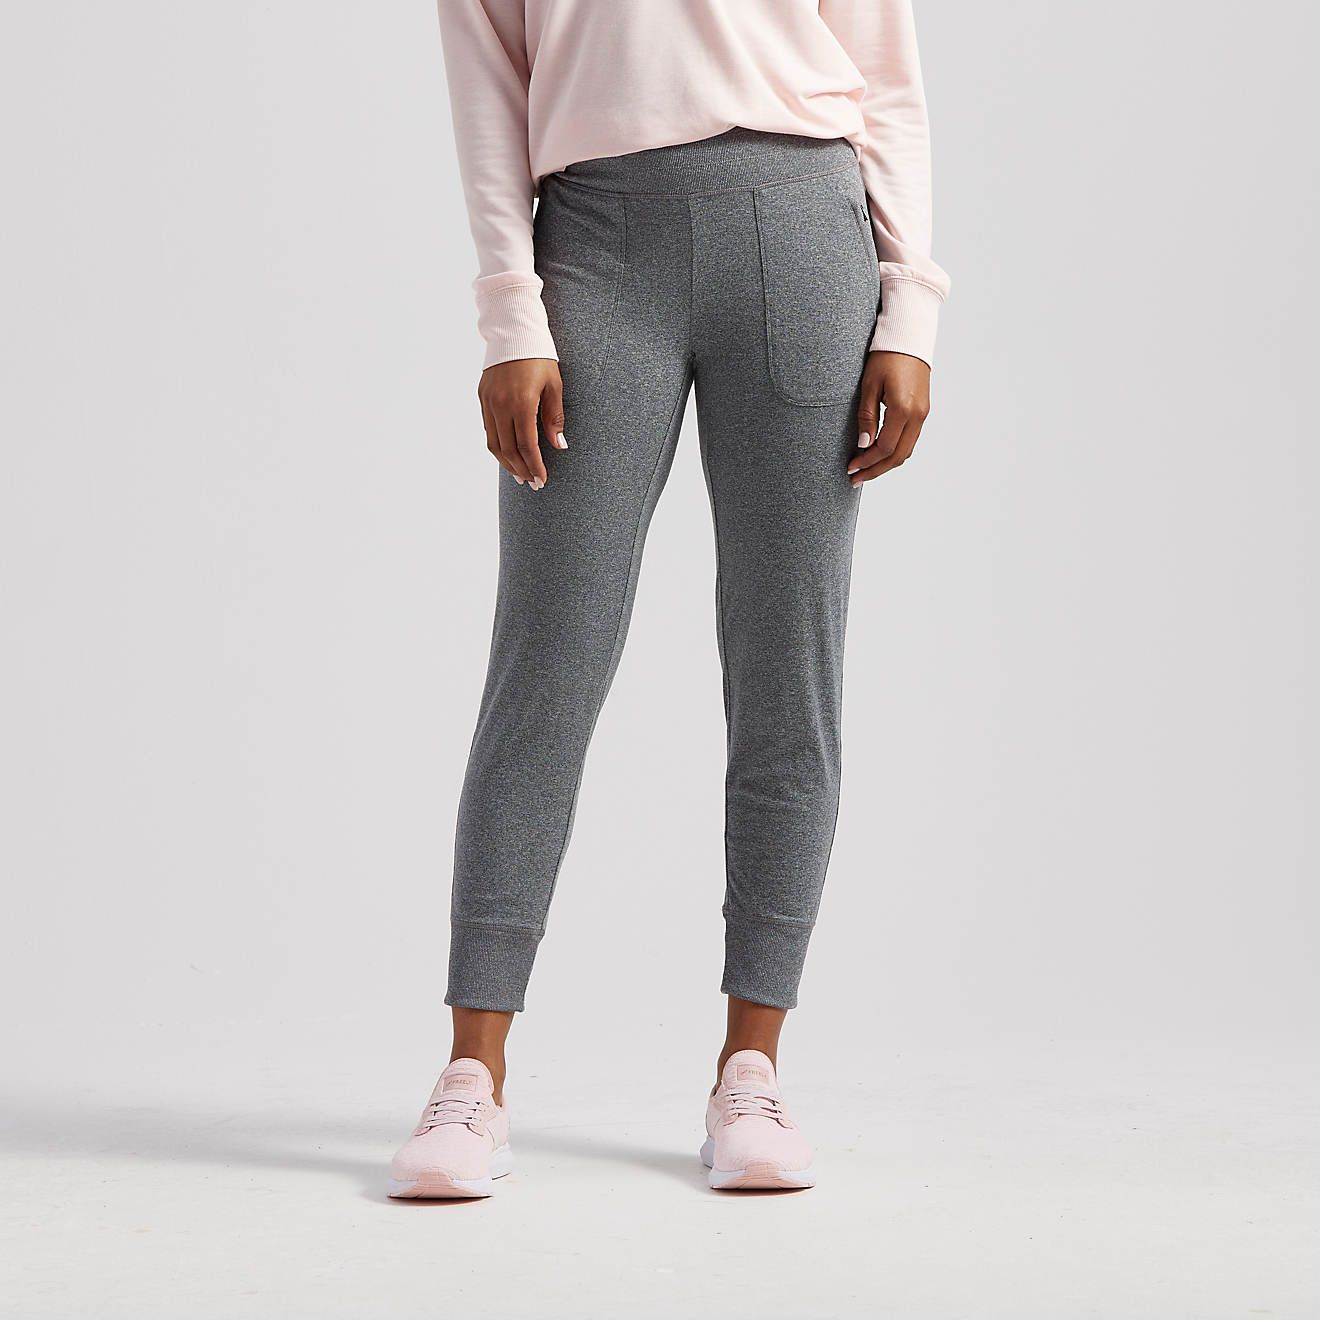 Freely Women's Zip Pocket Jogger Pants | Academy Sports + Outdoor Affiliate